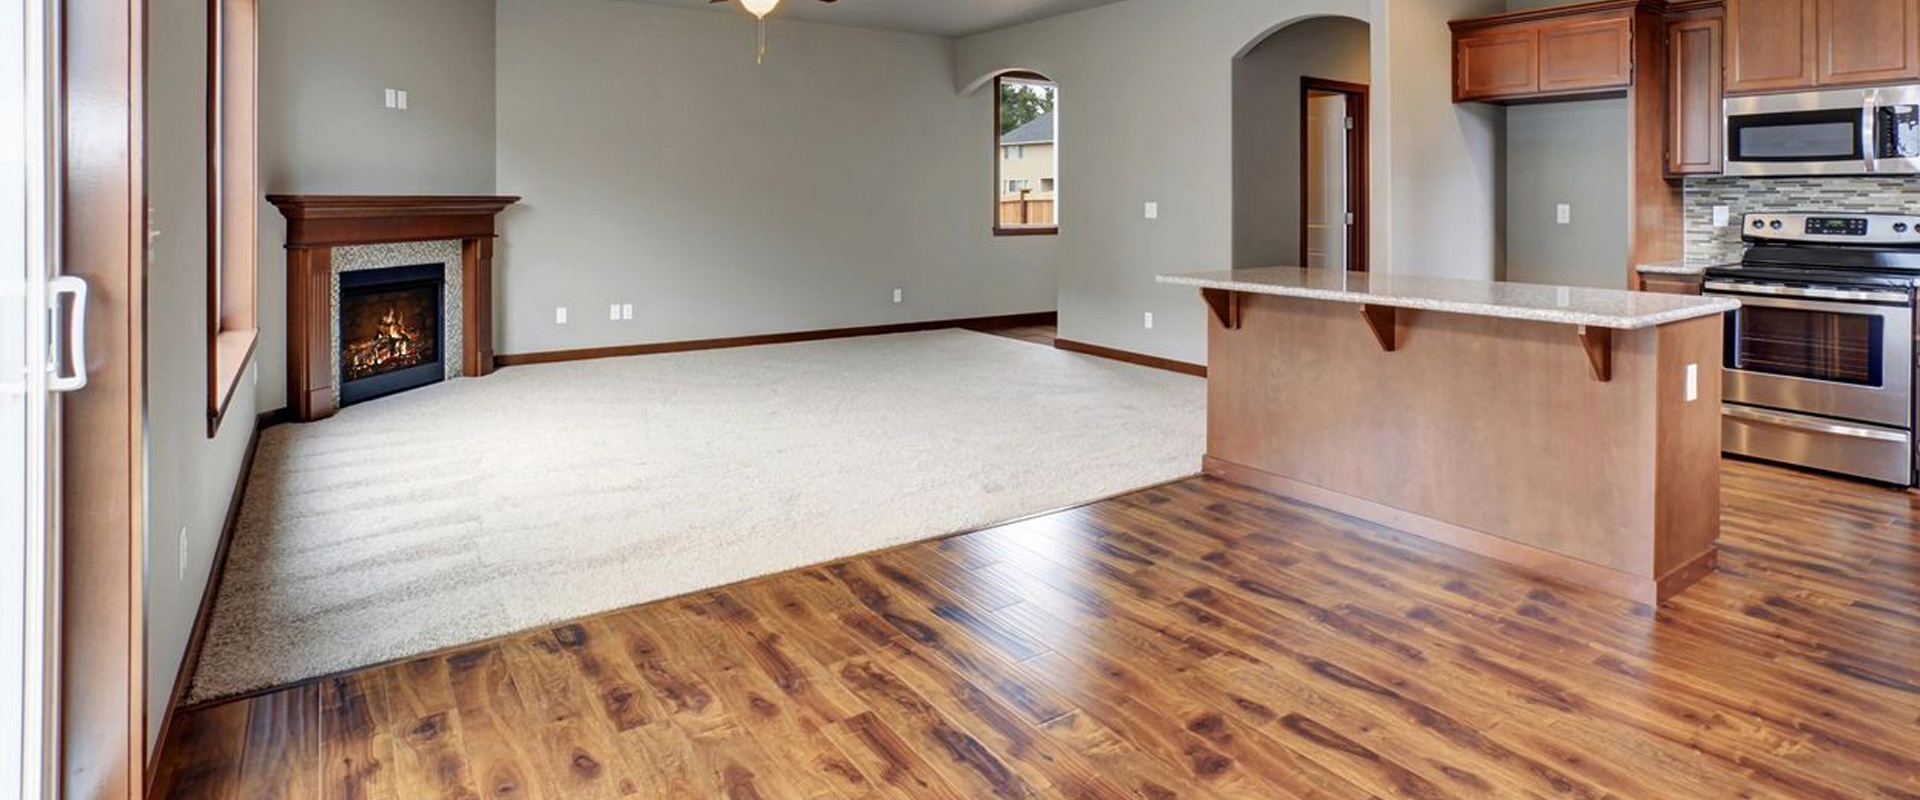 Professional Flooring and Contracting LLC